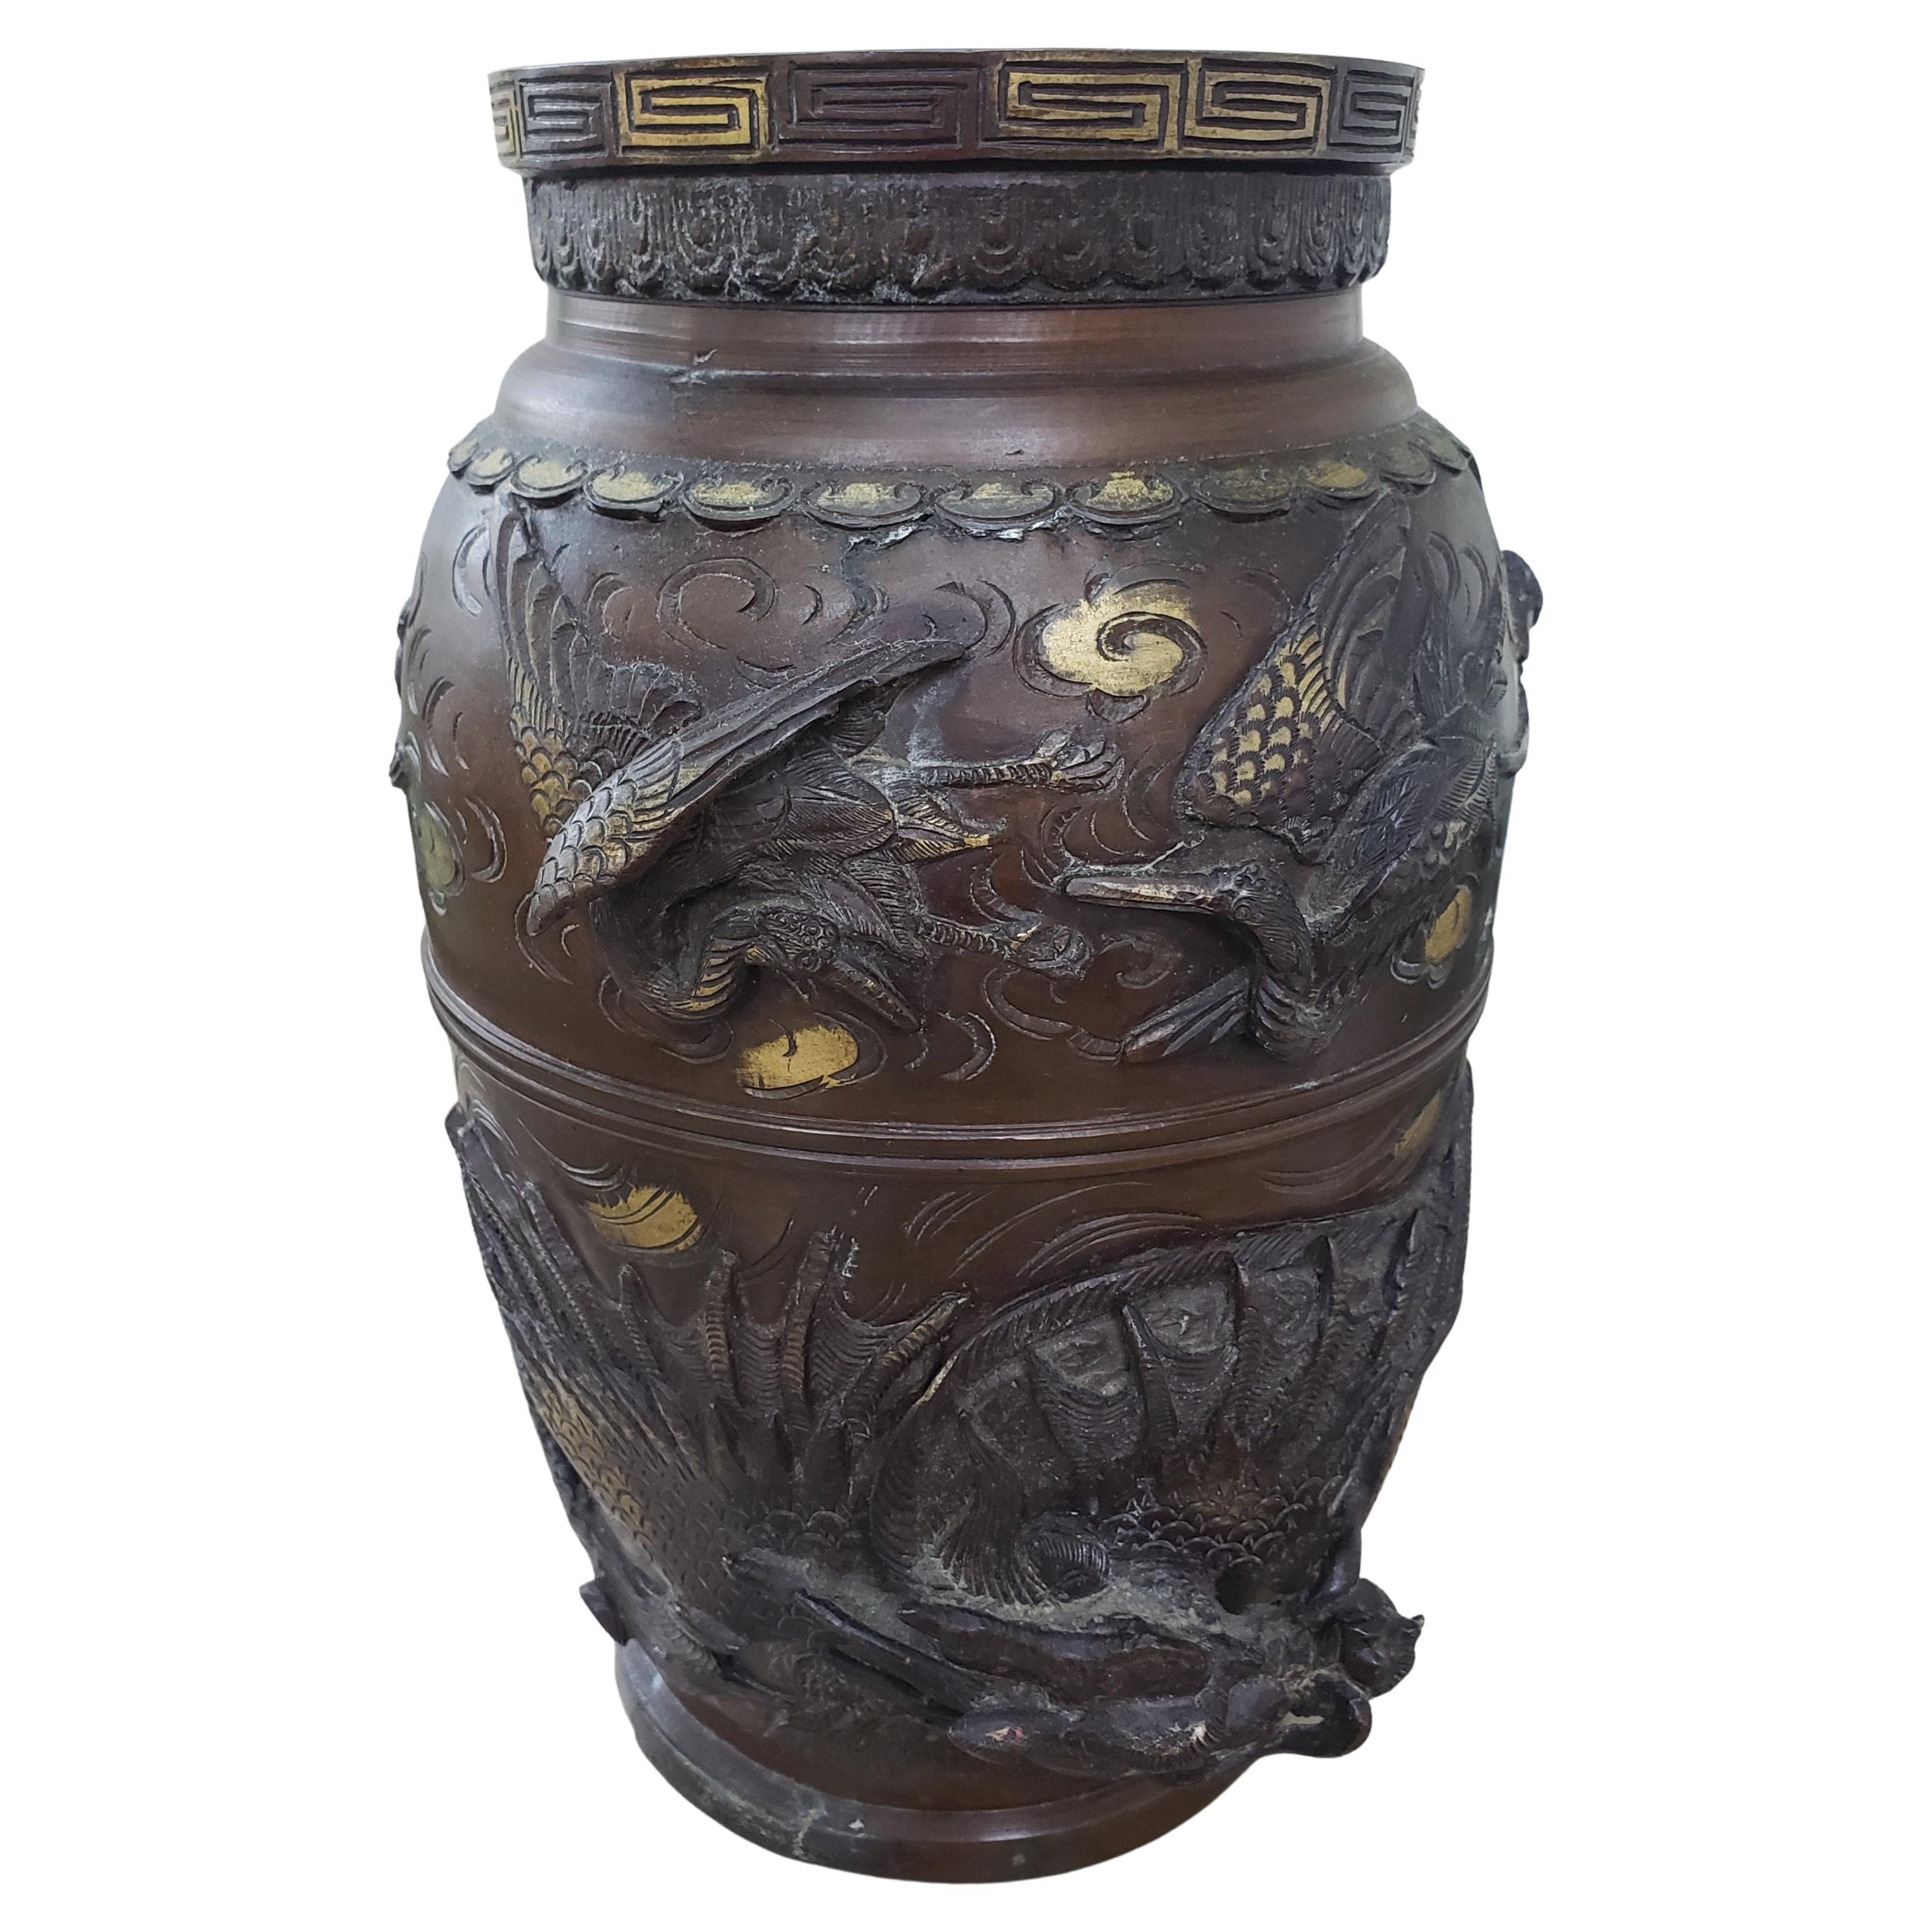 Amazing Antique fine quality Japanese 19th century bronze vase, circa 1860 with exquisite decorations of raised bronze crafted dragons and birds and many other original meiji decorations. Would look amazing in the right location. The very best color